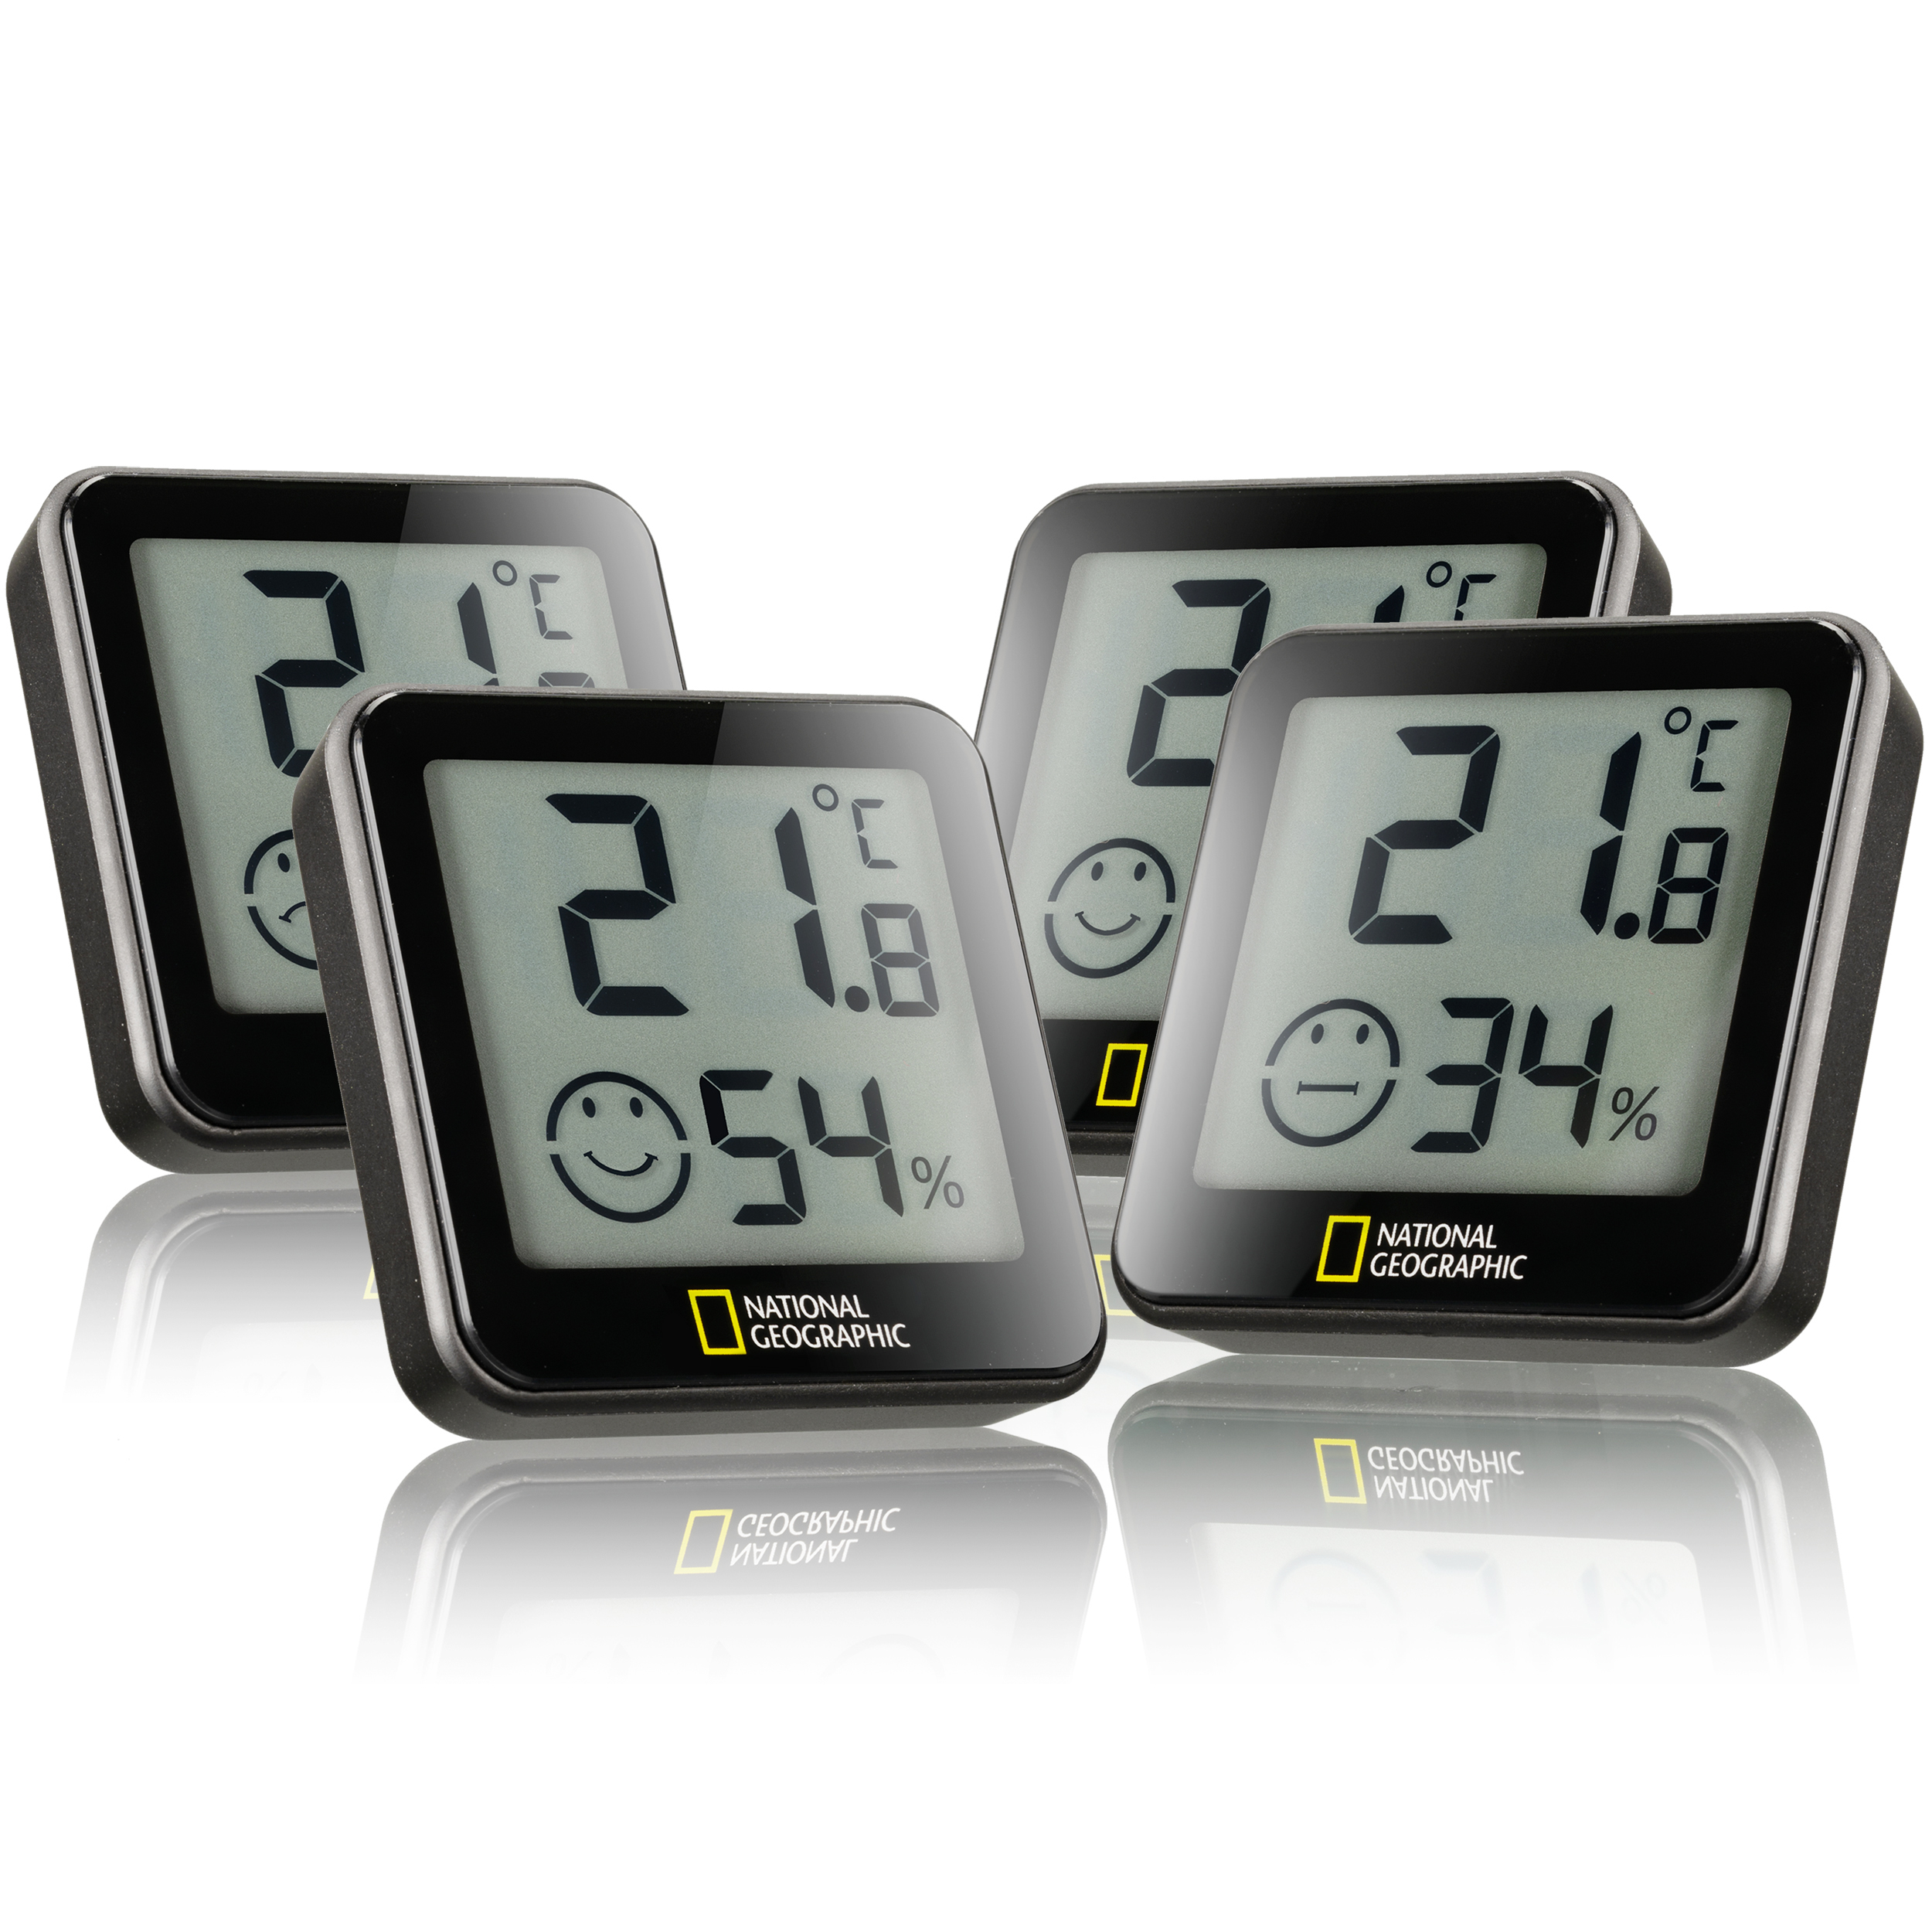 NATIONAL GEOGRAPHIC Tempy Thermo/Hygrometer, set of 4